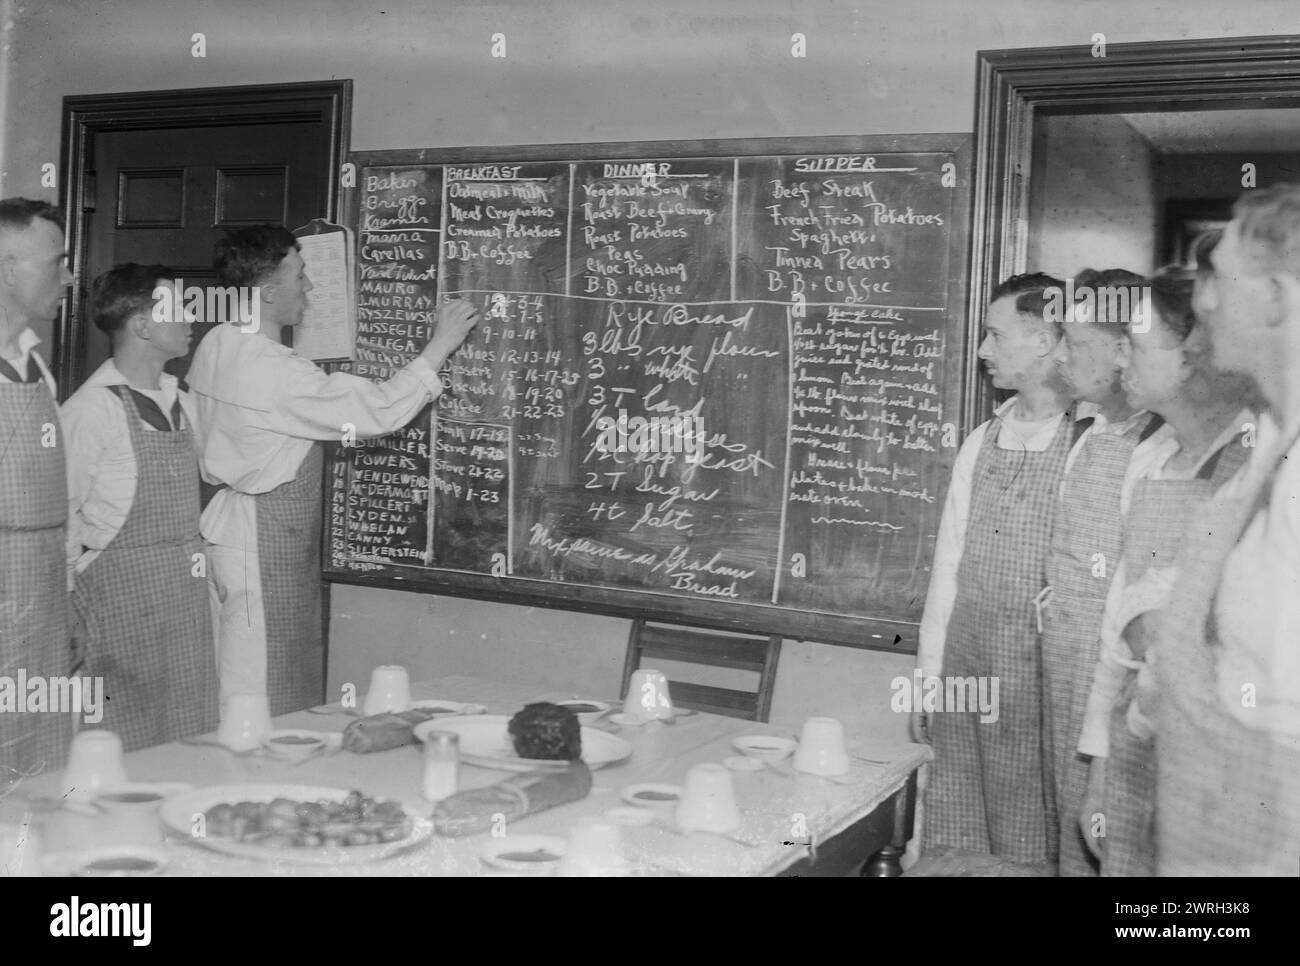 Recipes, Naval cooking school, 59th St. N.Y., between c1915 and 1918. Students looking at a blackboard on which are written recipes for rye bread and other foods, at the New York Cooking School, 126 East 59th Street, which trained soldiers to cook for the Navy during World War I. Stock Photo